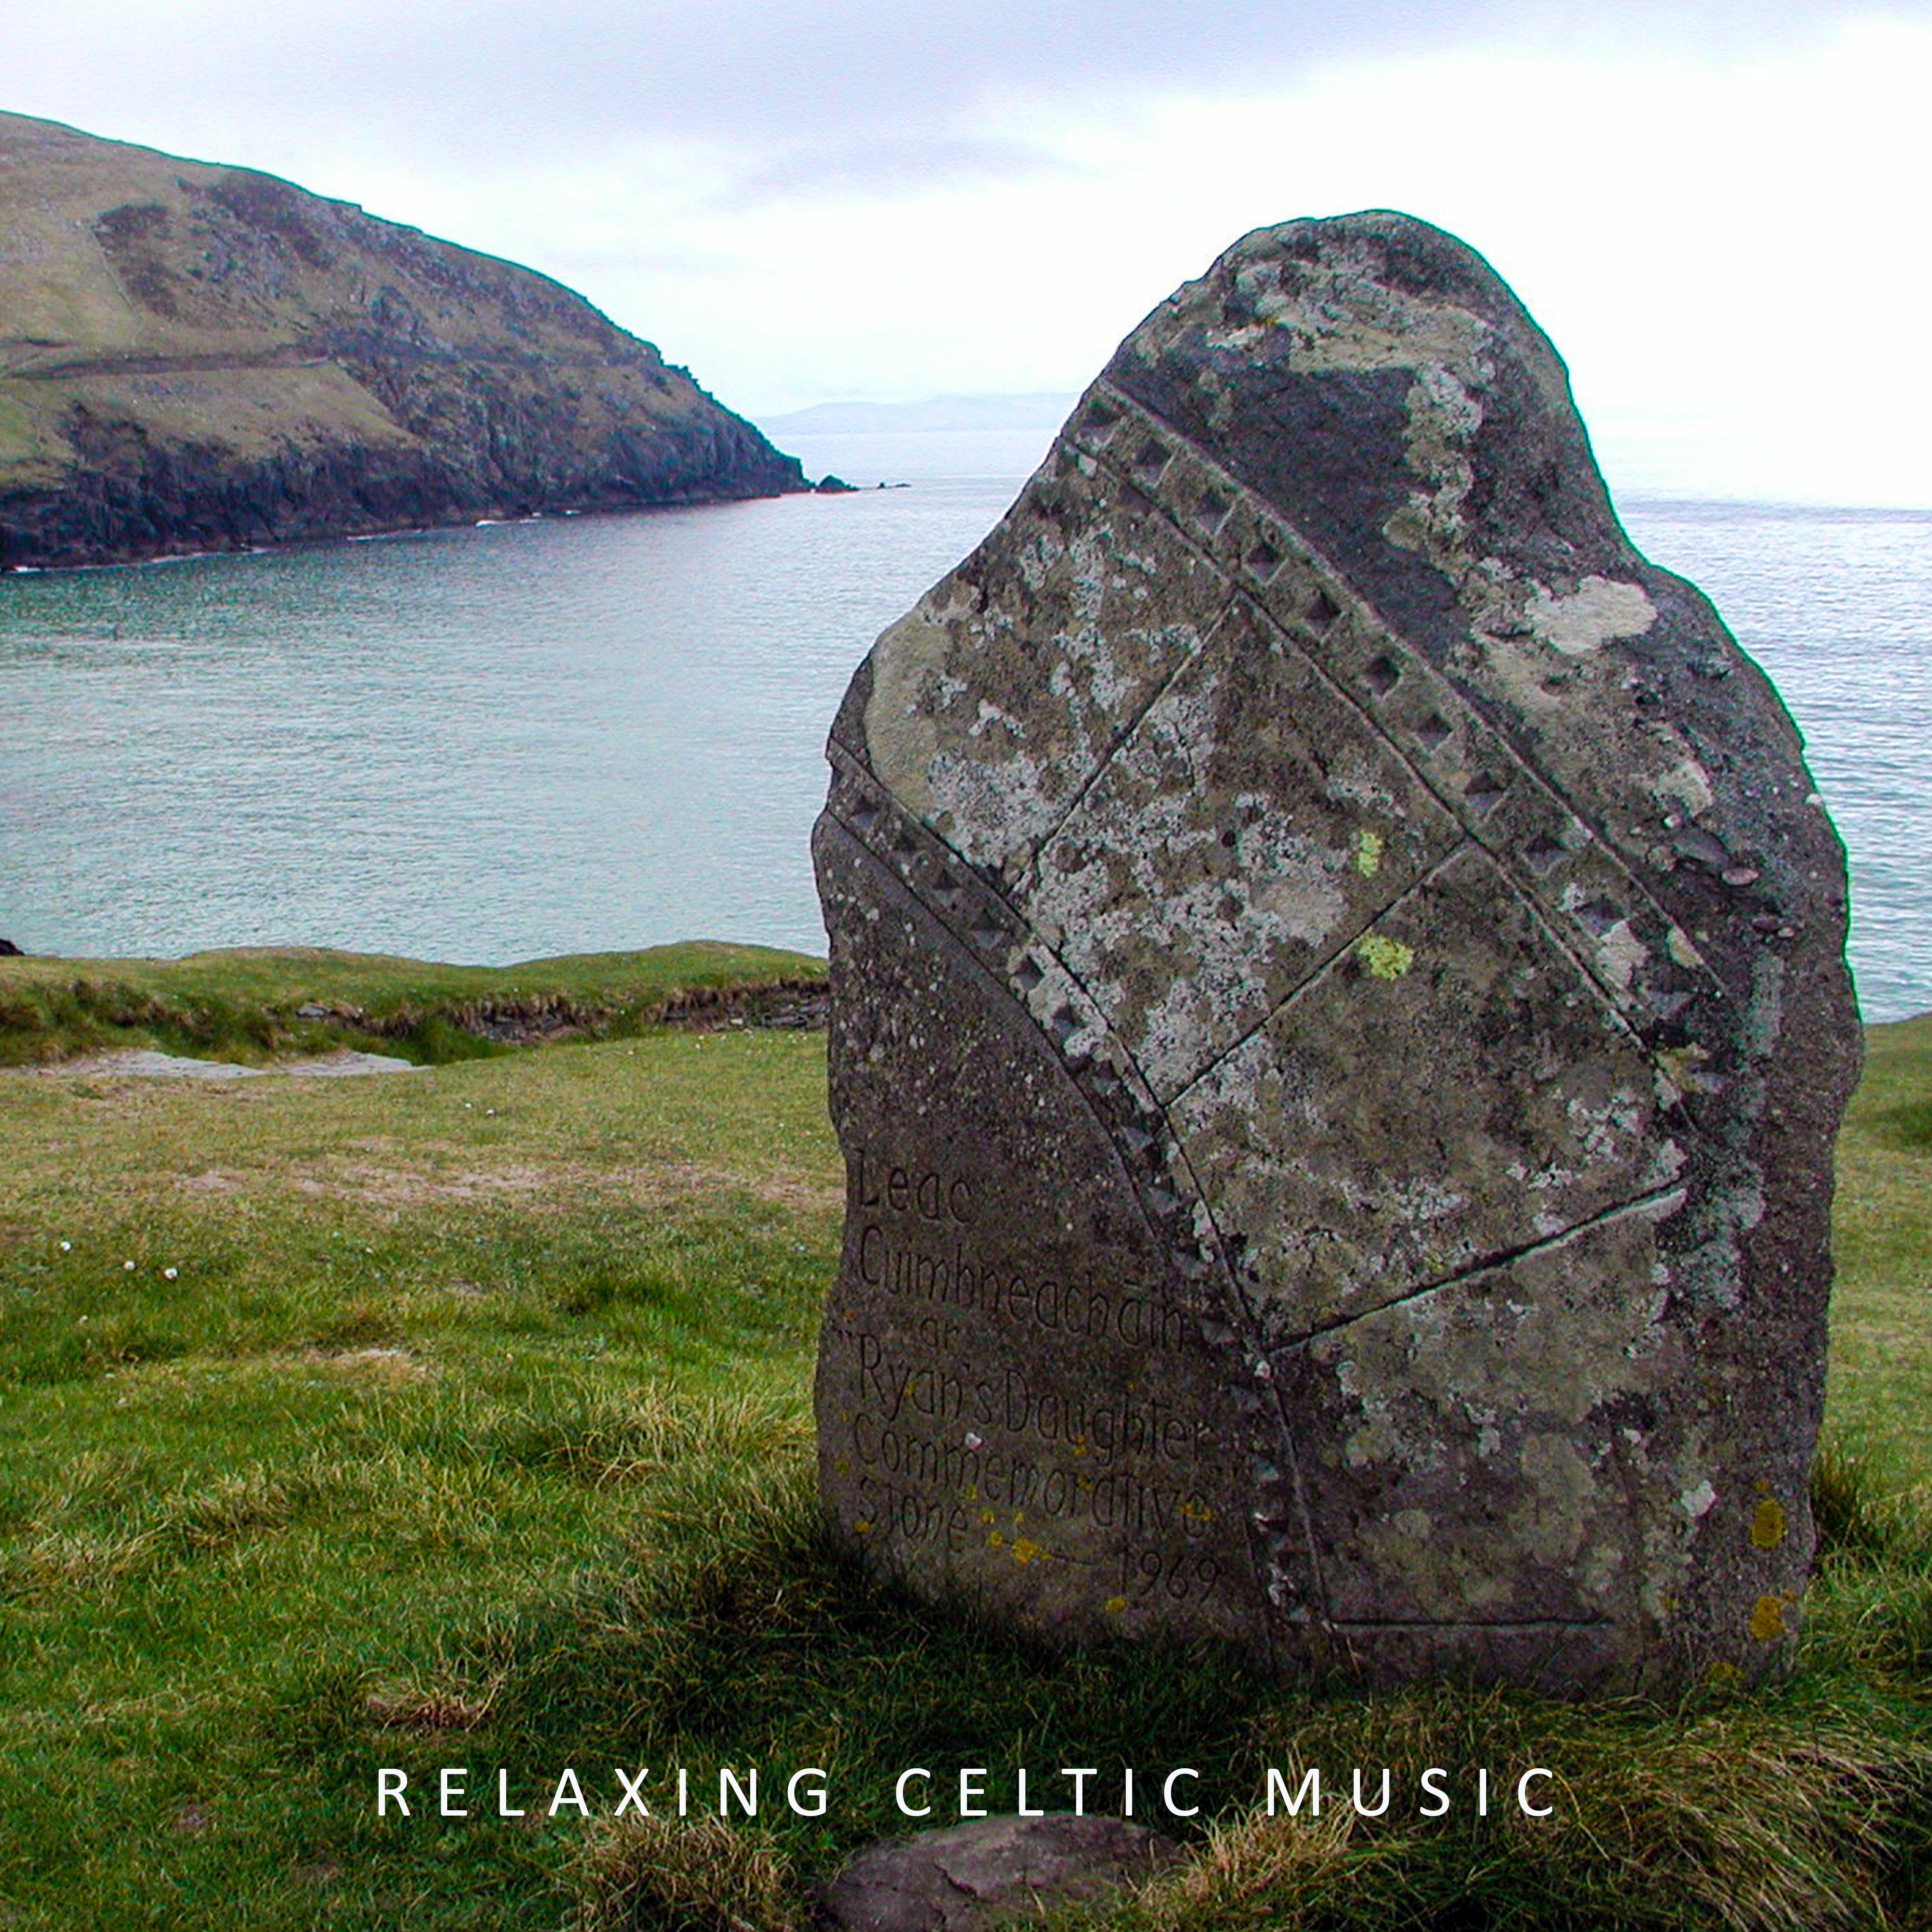 Relaxing Celtic Music: Irish Instrumental Music with Natural Soundscapes Created for Relaxation, Rest, Sleep, Spa, Massage and Wellness